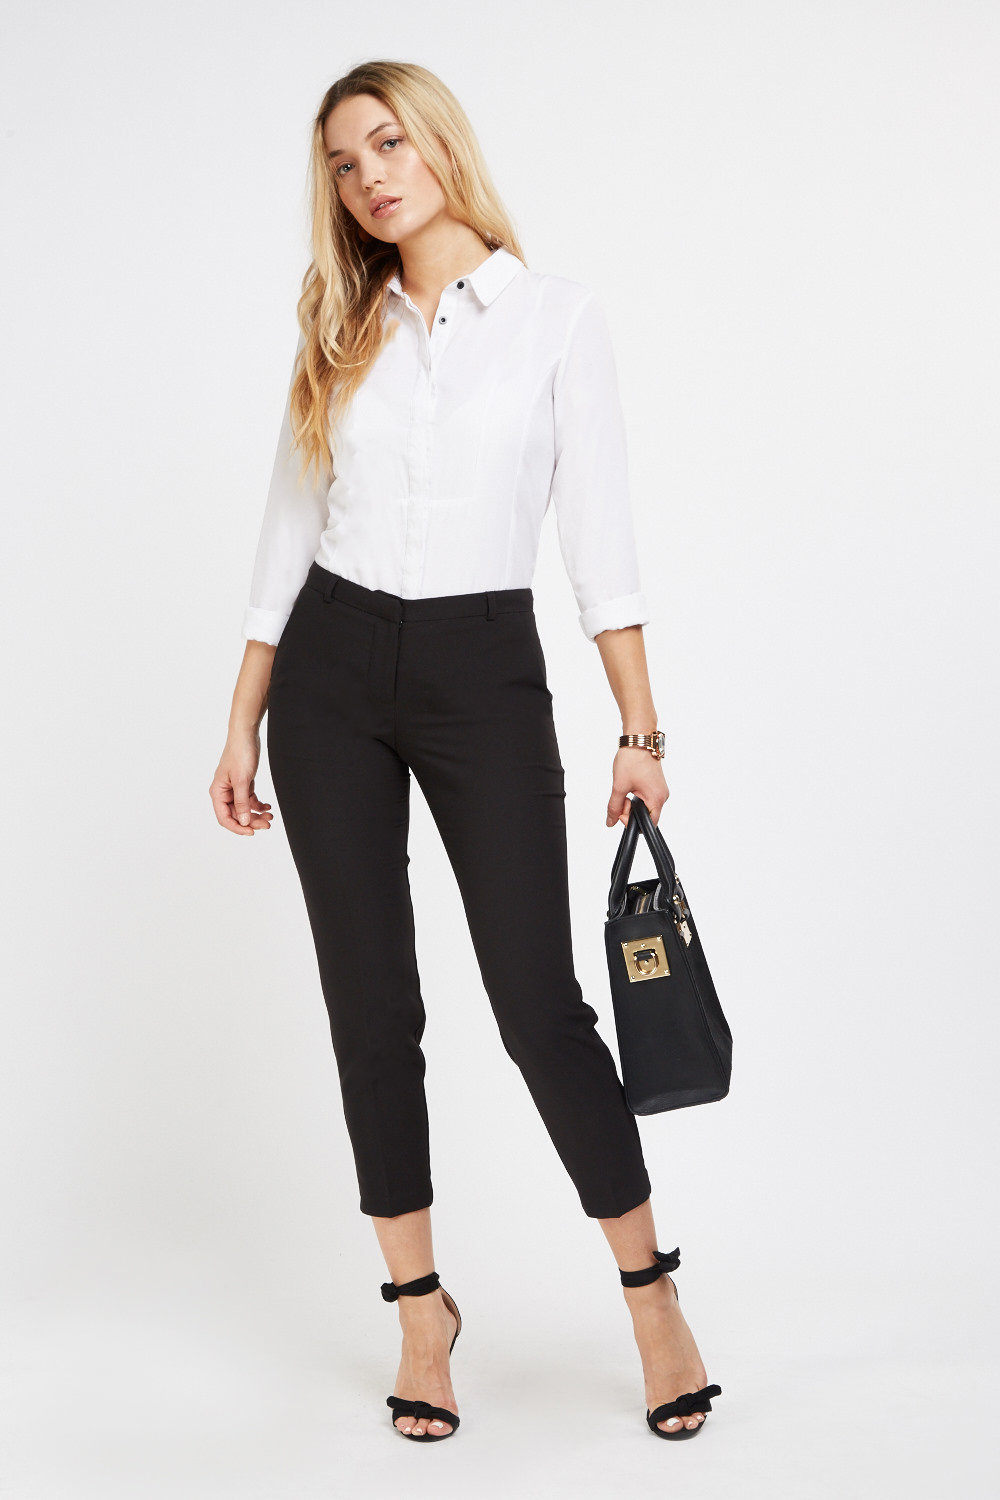 Ankle Grazer Tapered Trousers - Just $6